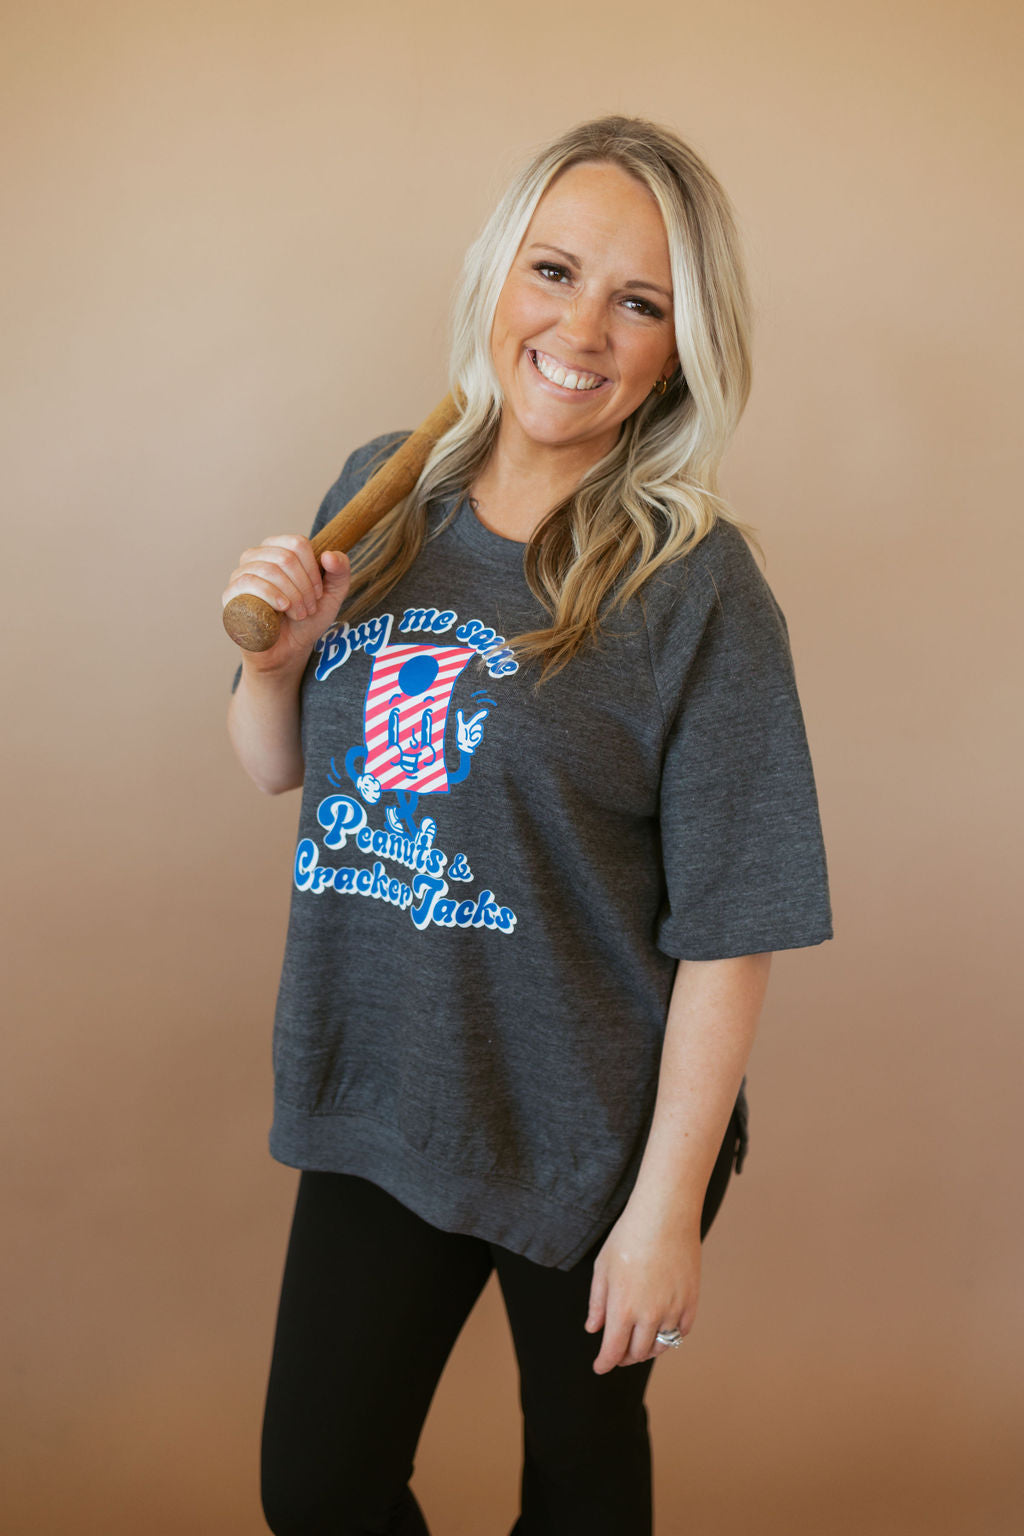 Peanuts + Cracker Jacks | French Terry Side Slit Pullover | Adult-Sister Shirts-Sister Shirts, Cute & Custom Tees for Mama & Littles in Trussville, Alabama.